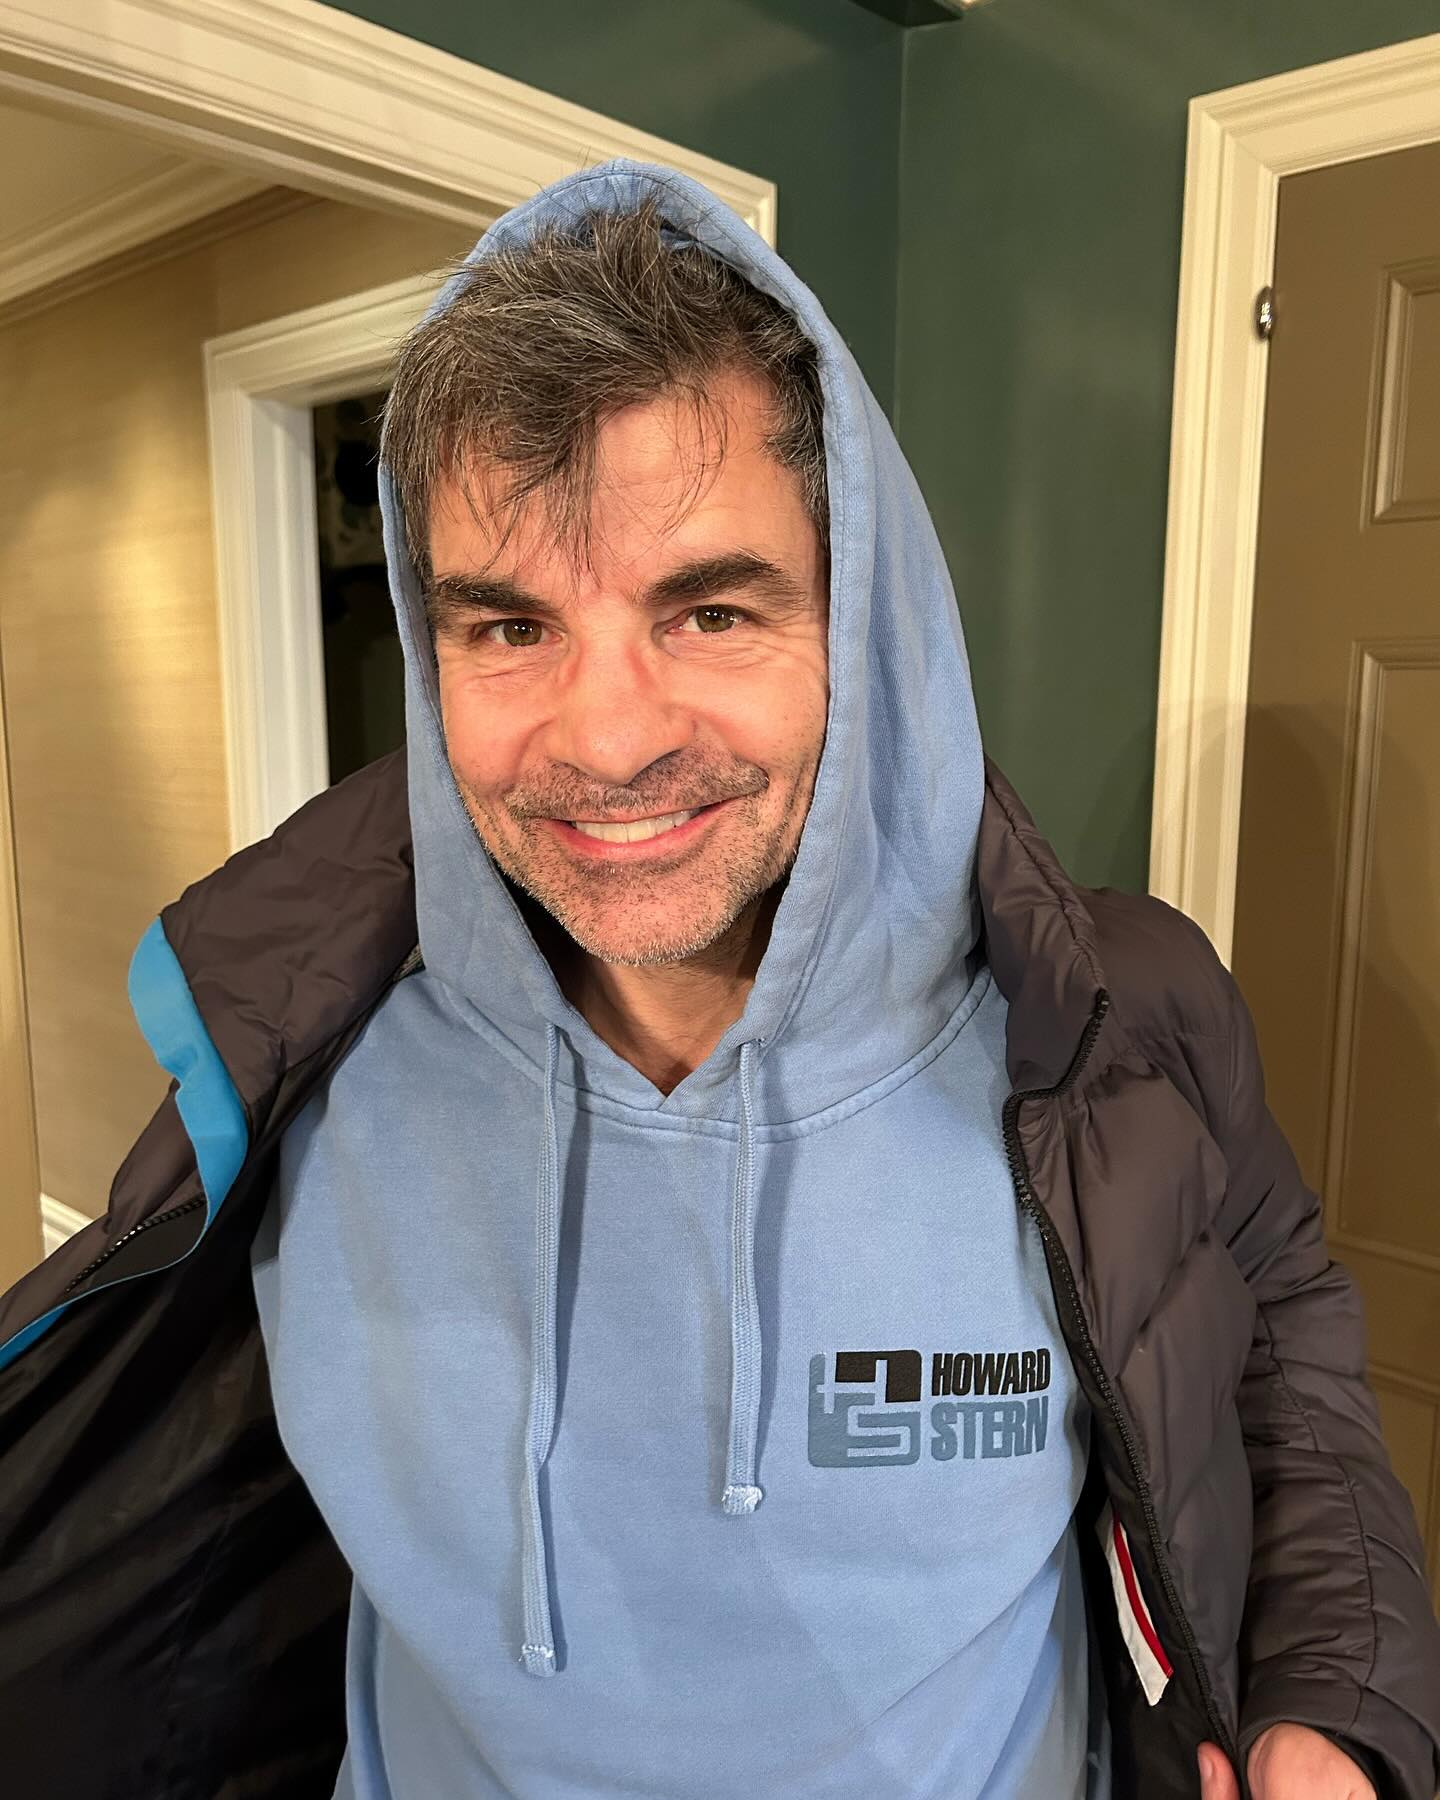 George donned a hoodie and some unexpected scruff he's seemingly grown out while away from GMA